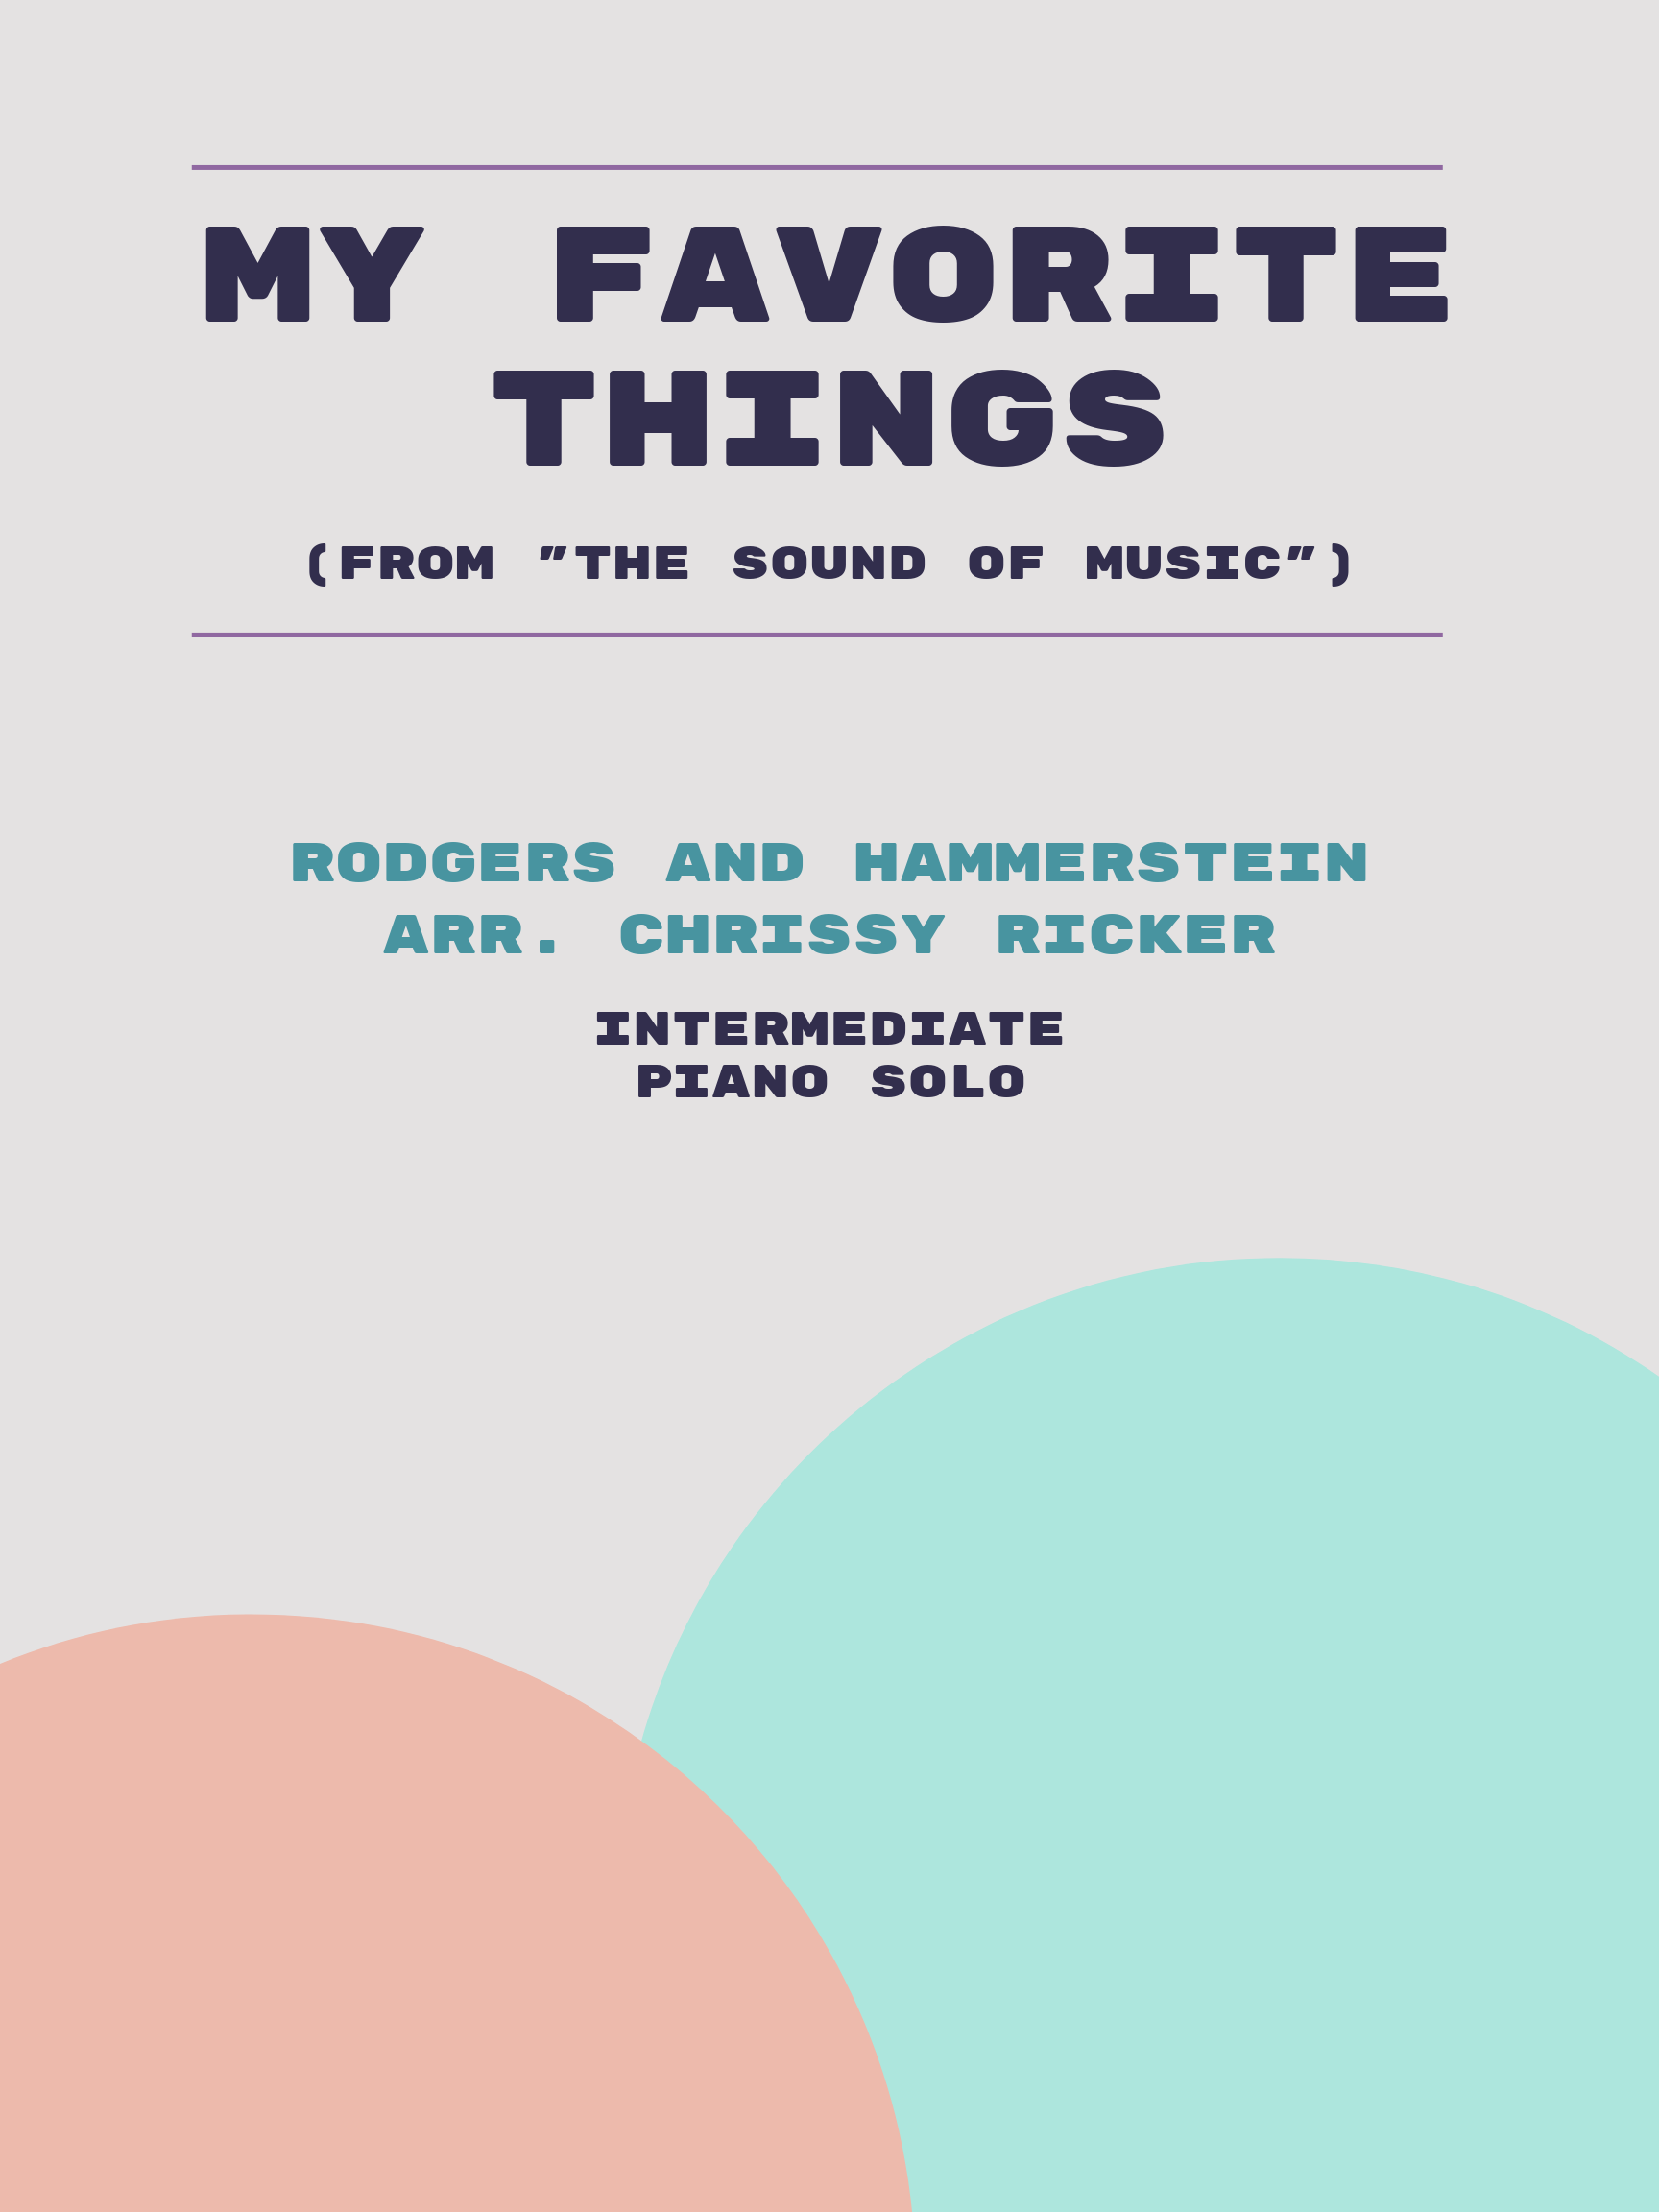 My Favorite Things by Rodgers and Hammerstein